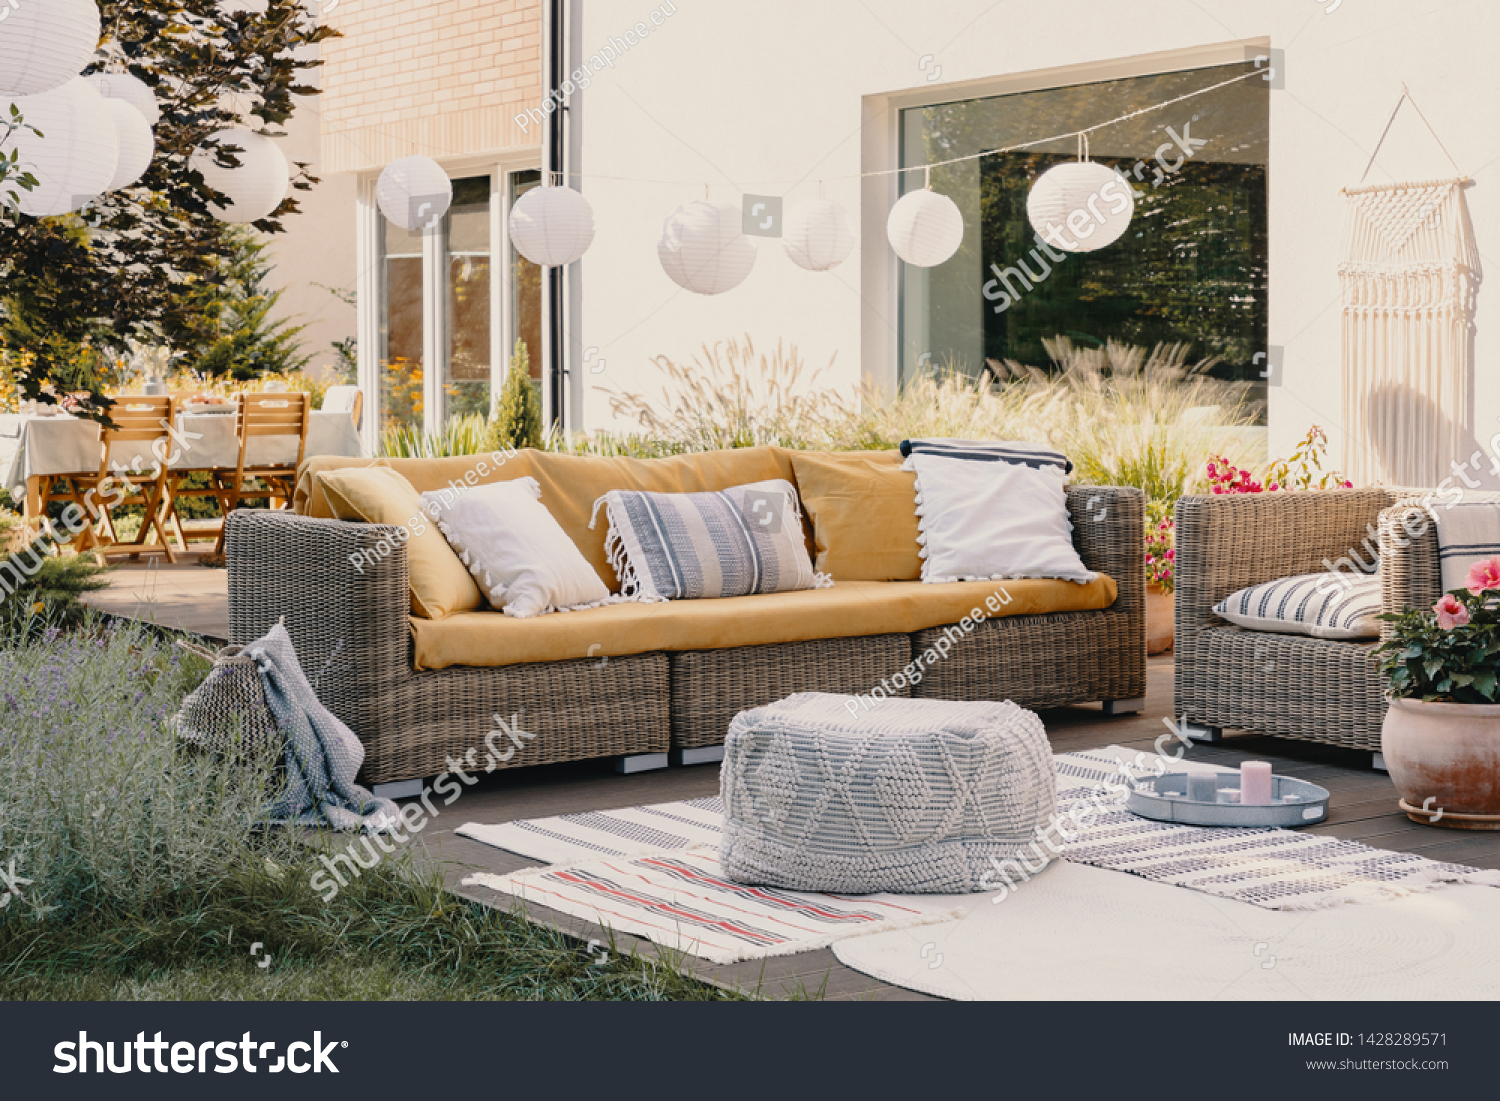 Pouf next to rattan couch and armchair on wooden terrace with flowers and lamps #1428289571